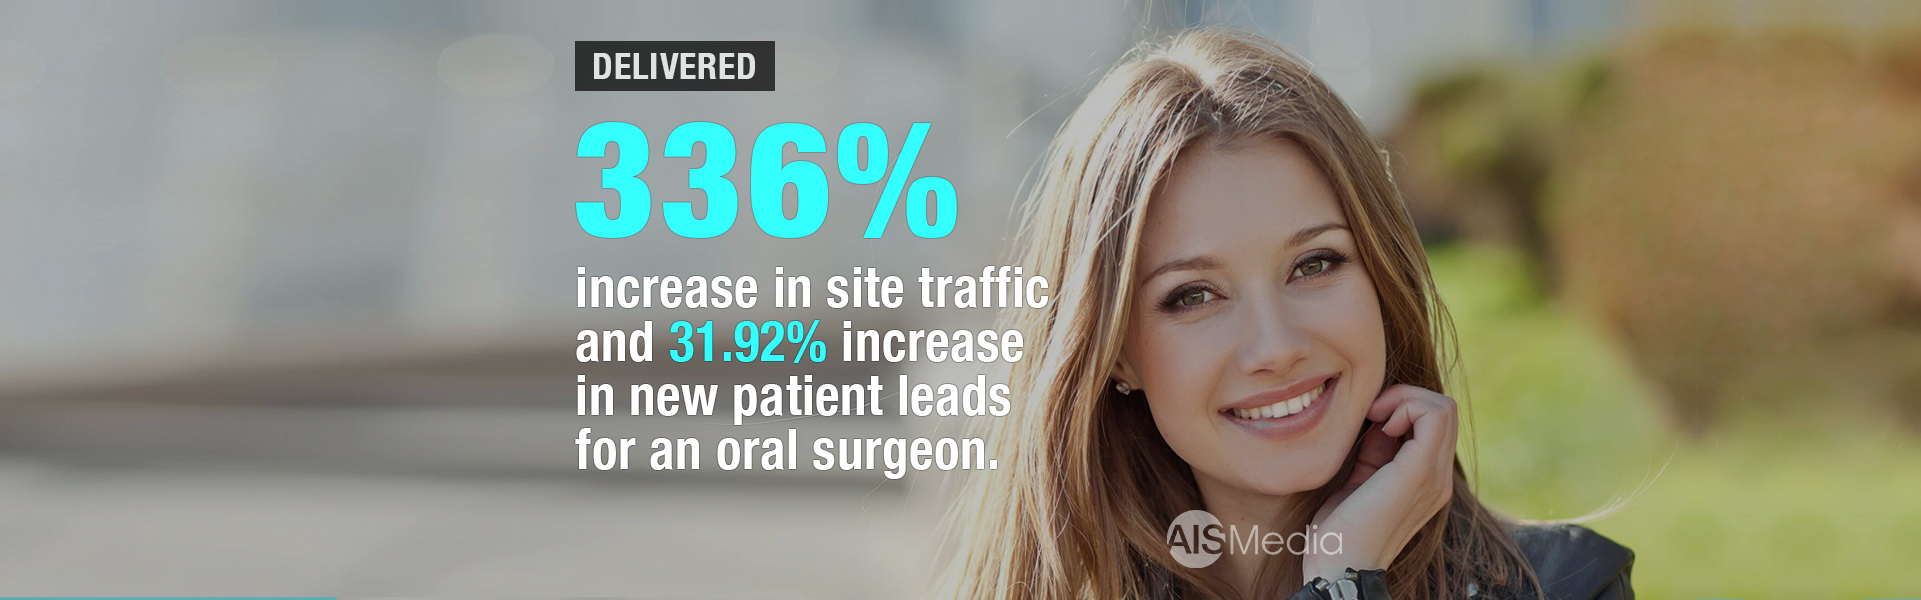 AIS Media delivered 336% increase in site traffic and 31.92% increase in new patient leads for GAOFS 1